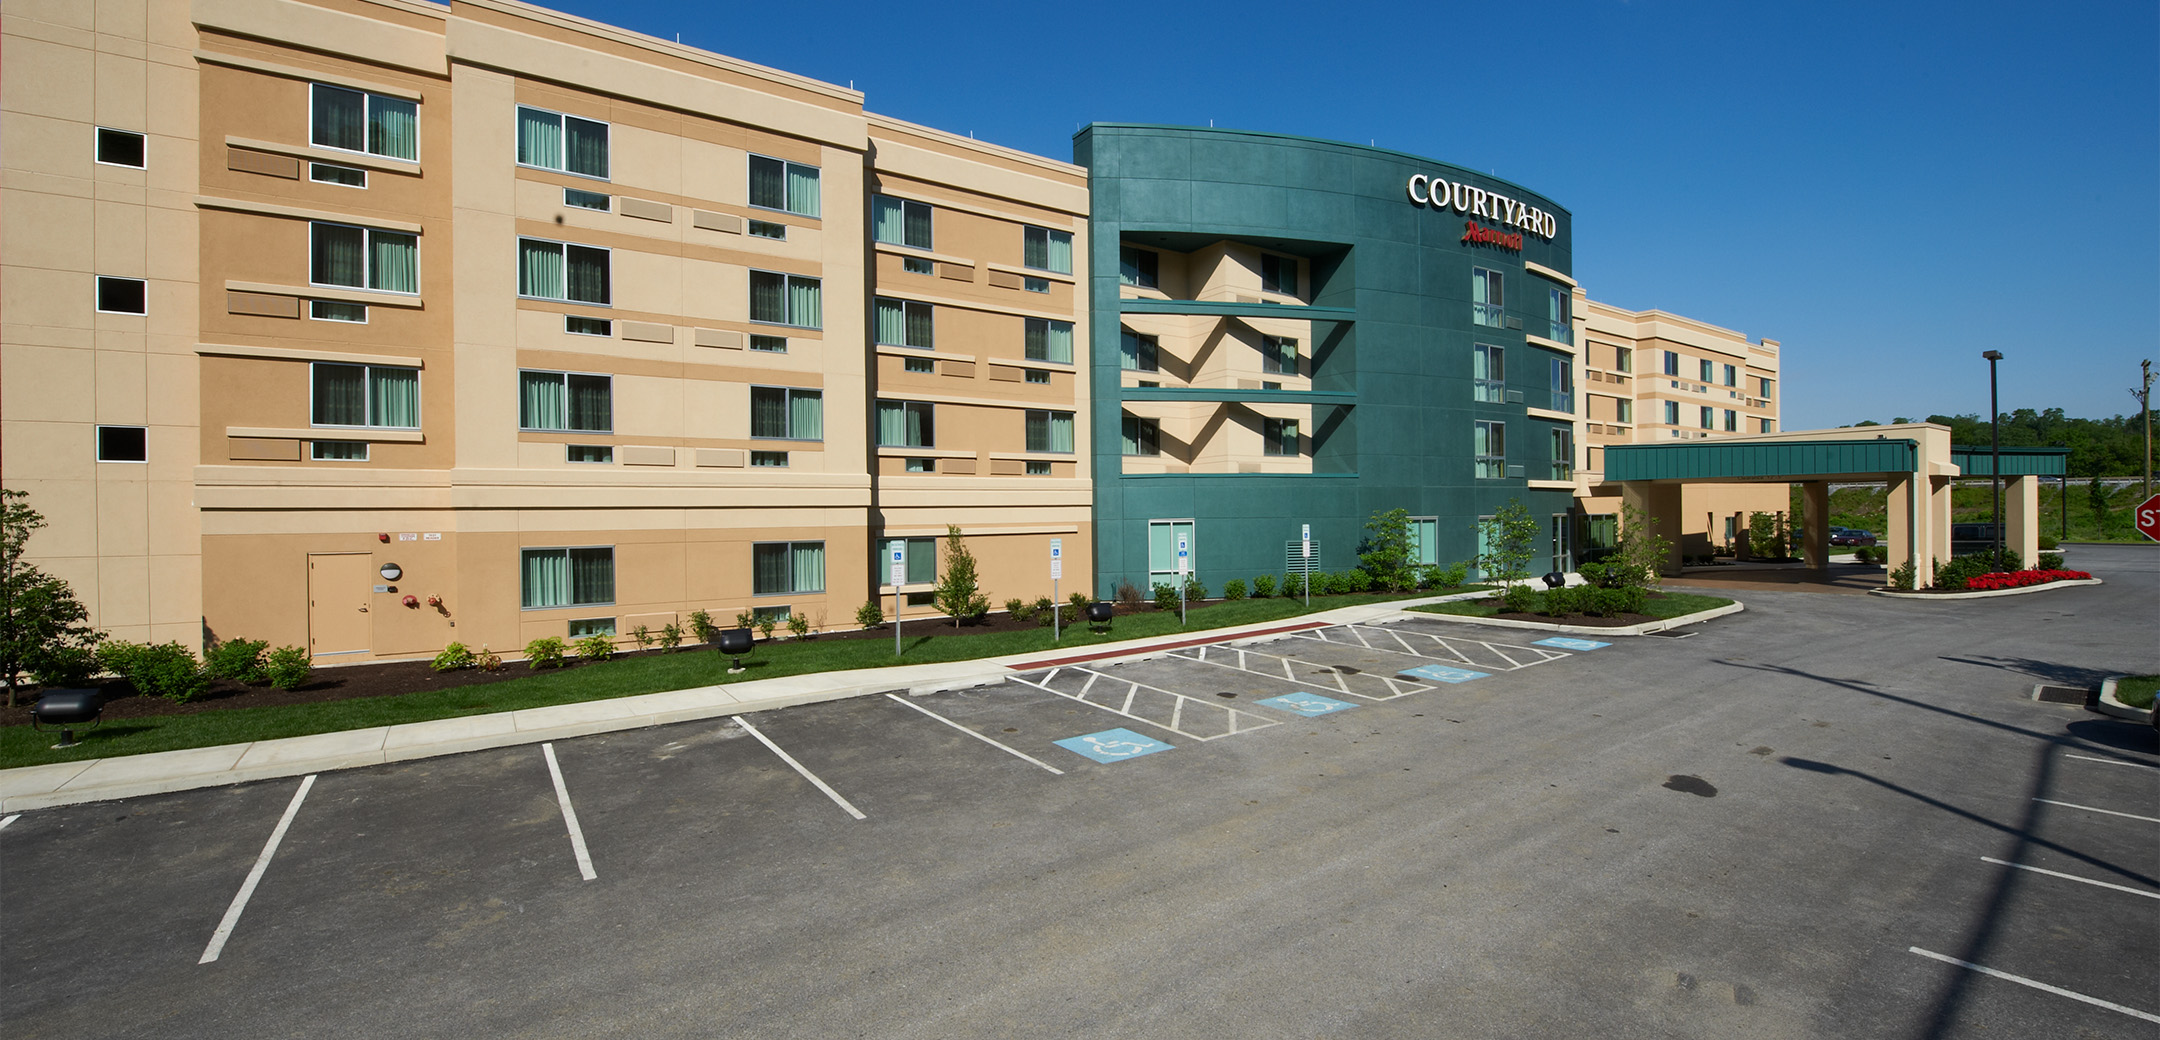 A angled view of the Marriot Courtyard hotel front enterance,showcasing the teal accents and front parking lot space.